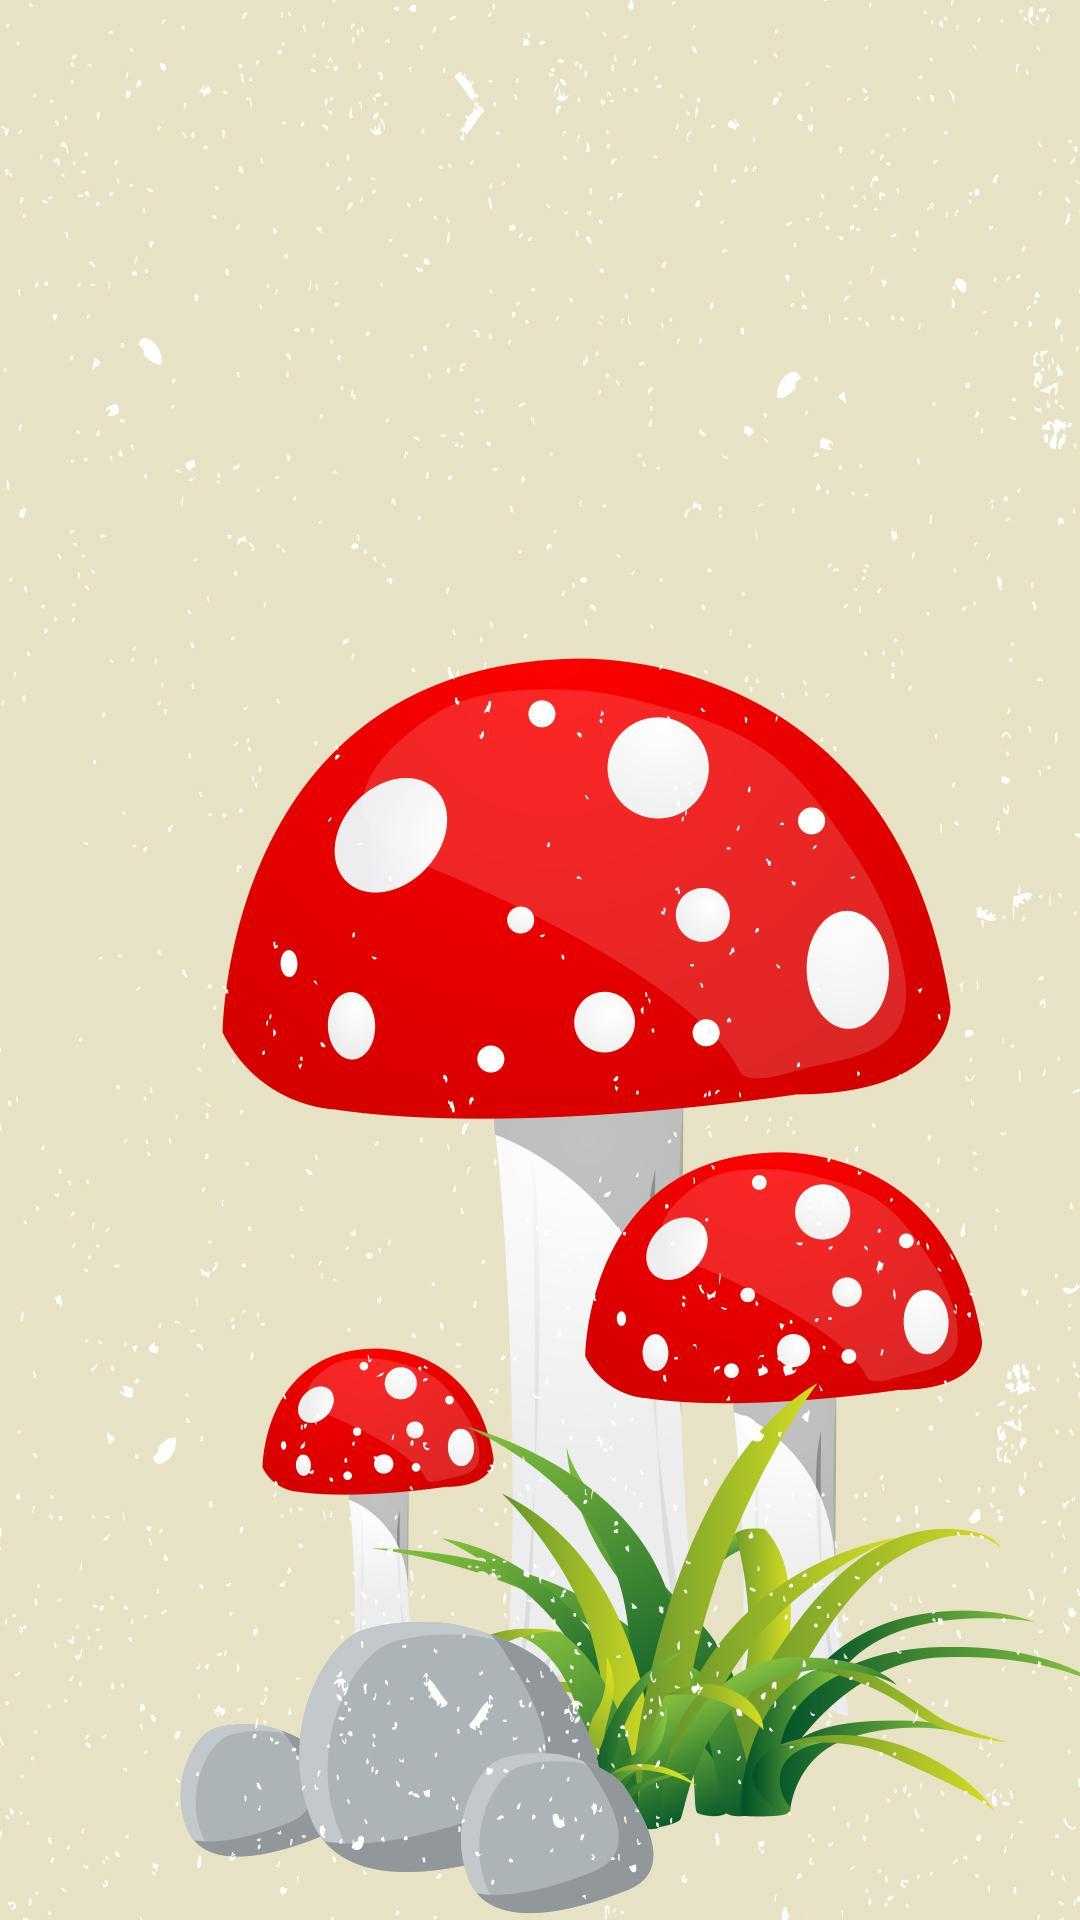 Simple Background With A Picture Of An Aesthetic Mushroom House Wallpaper  Image For Free Download  Pngtree